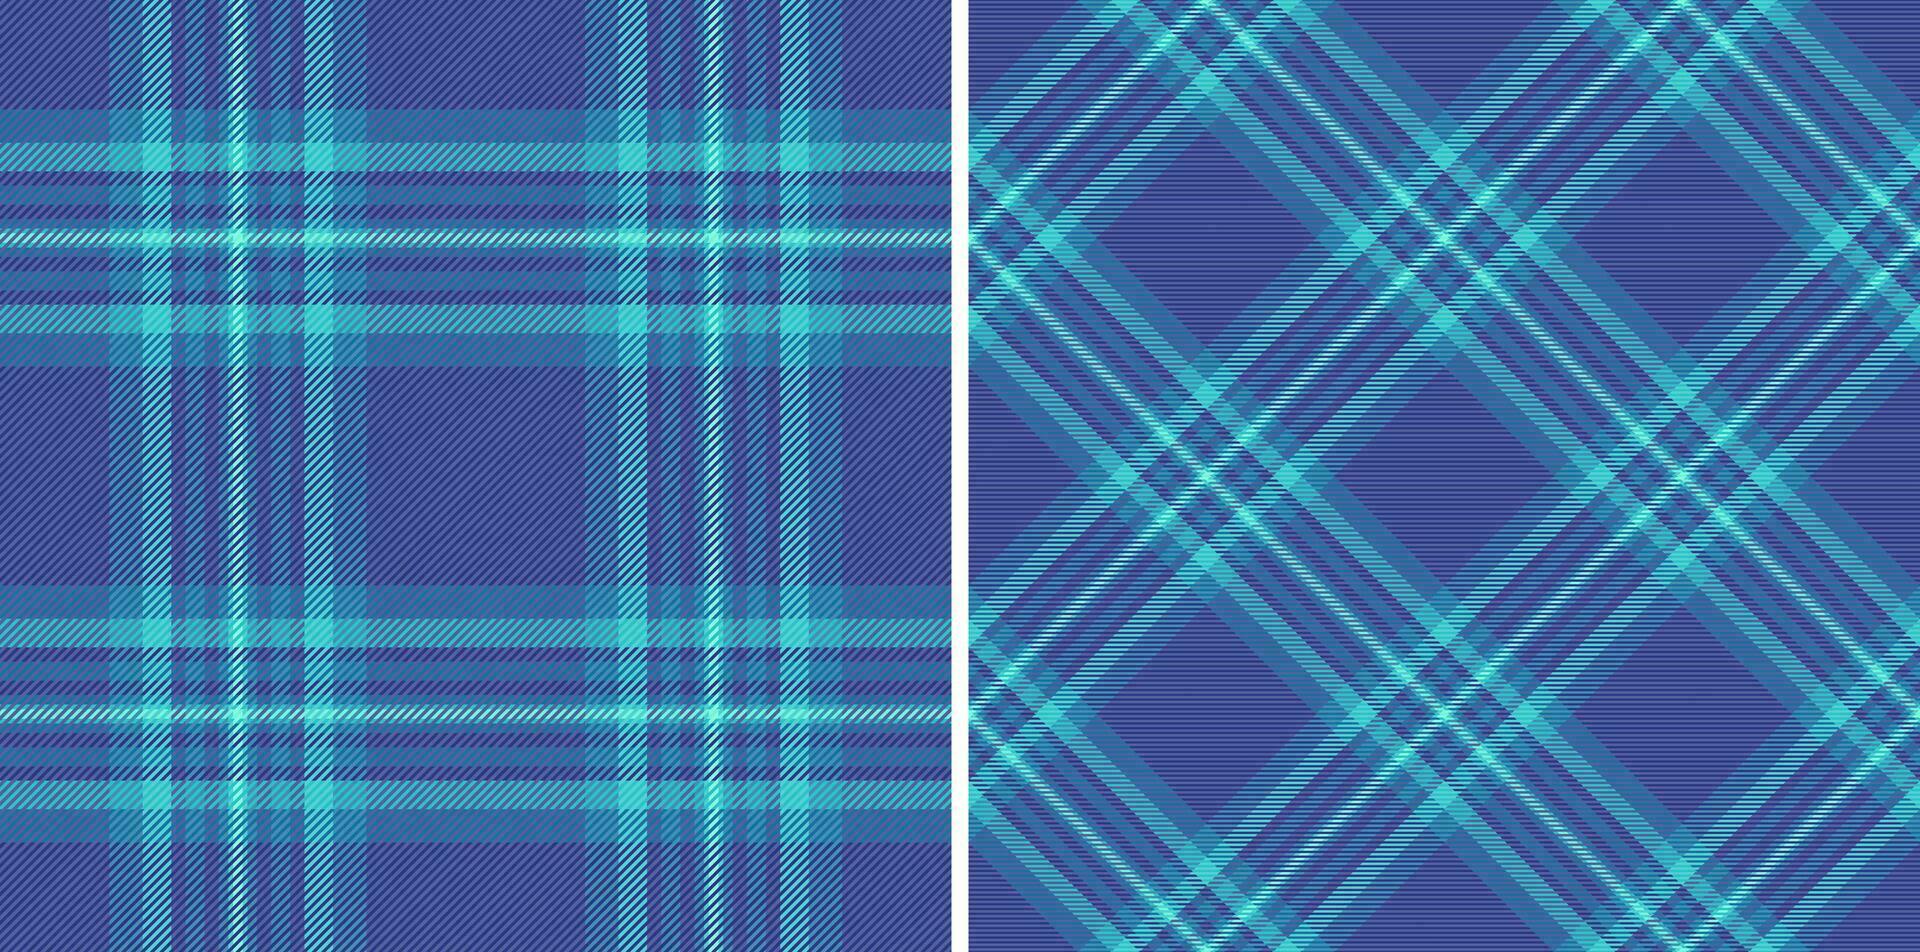 Pattern check vector of background seamless plaid with a fabric tartan texture textile.